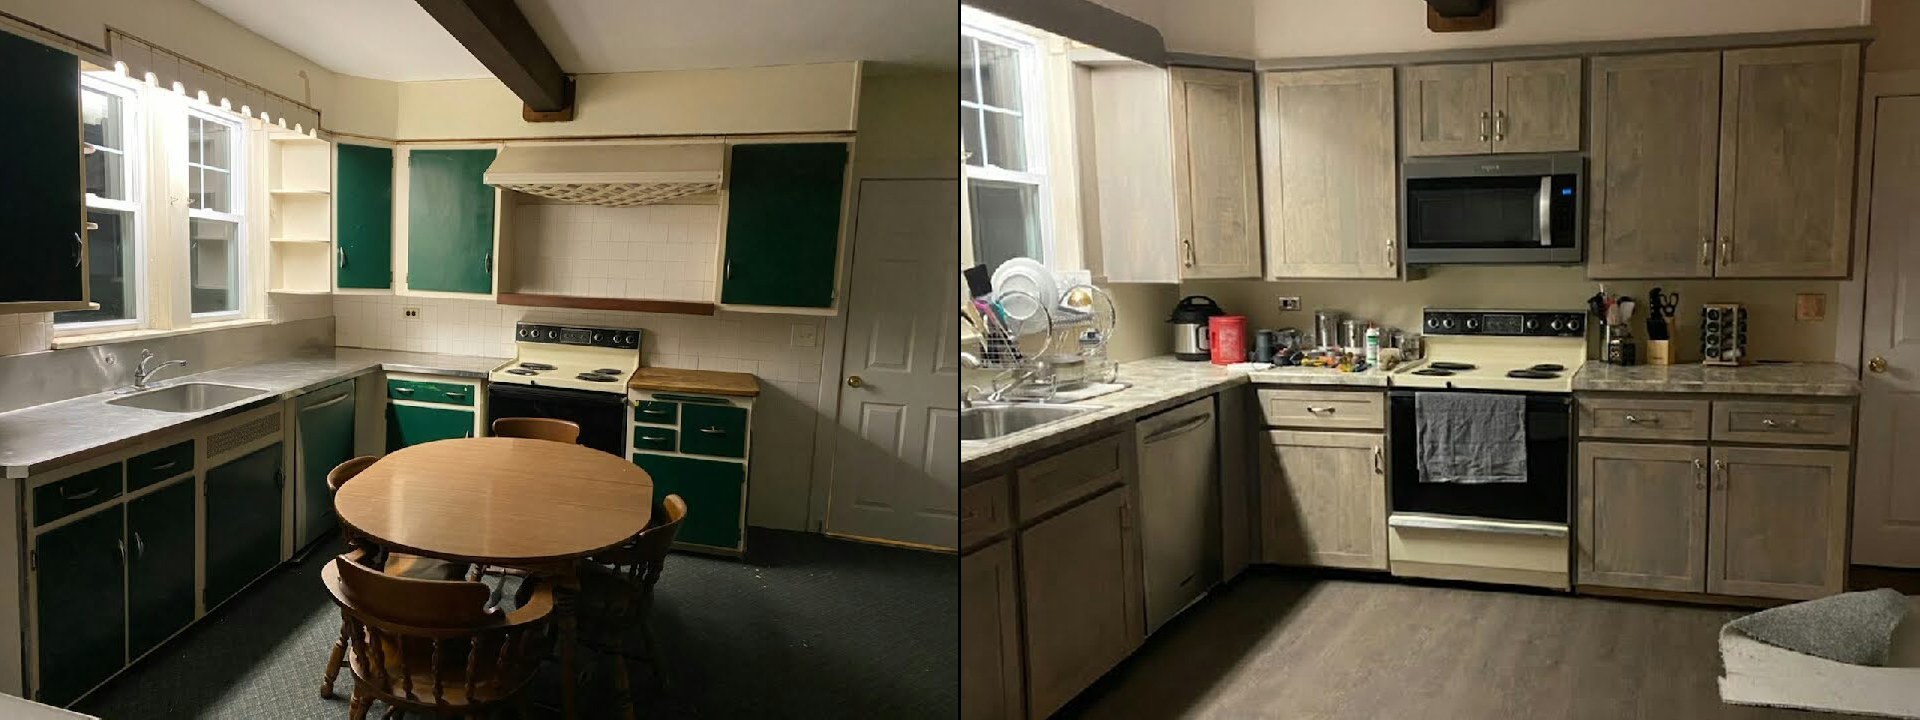 Before and After of Custom Kitchen Refacing in grey stain with all new hardware in L-shaped kitchen